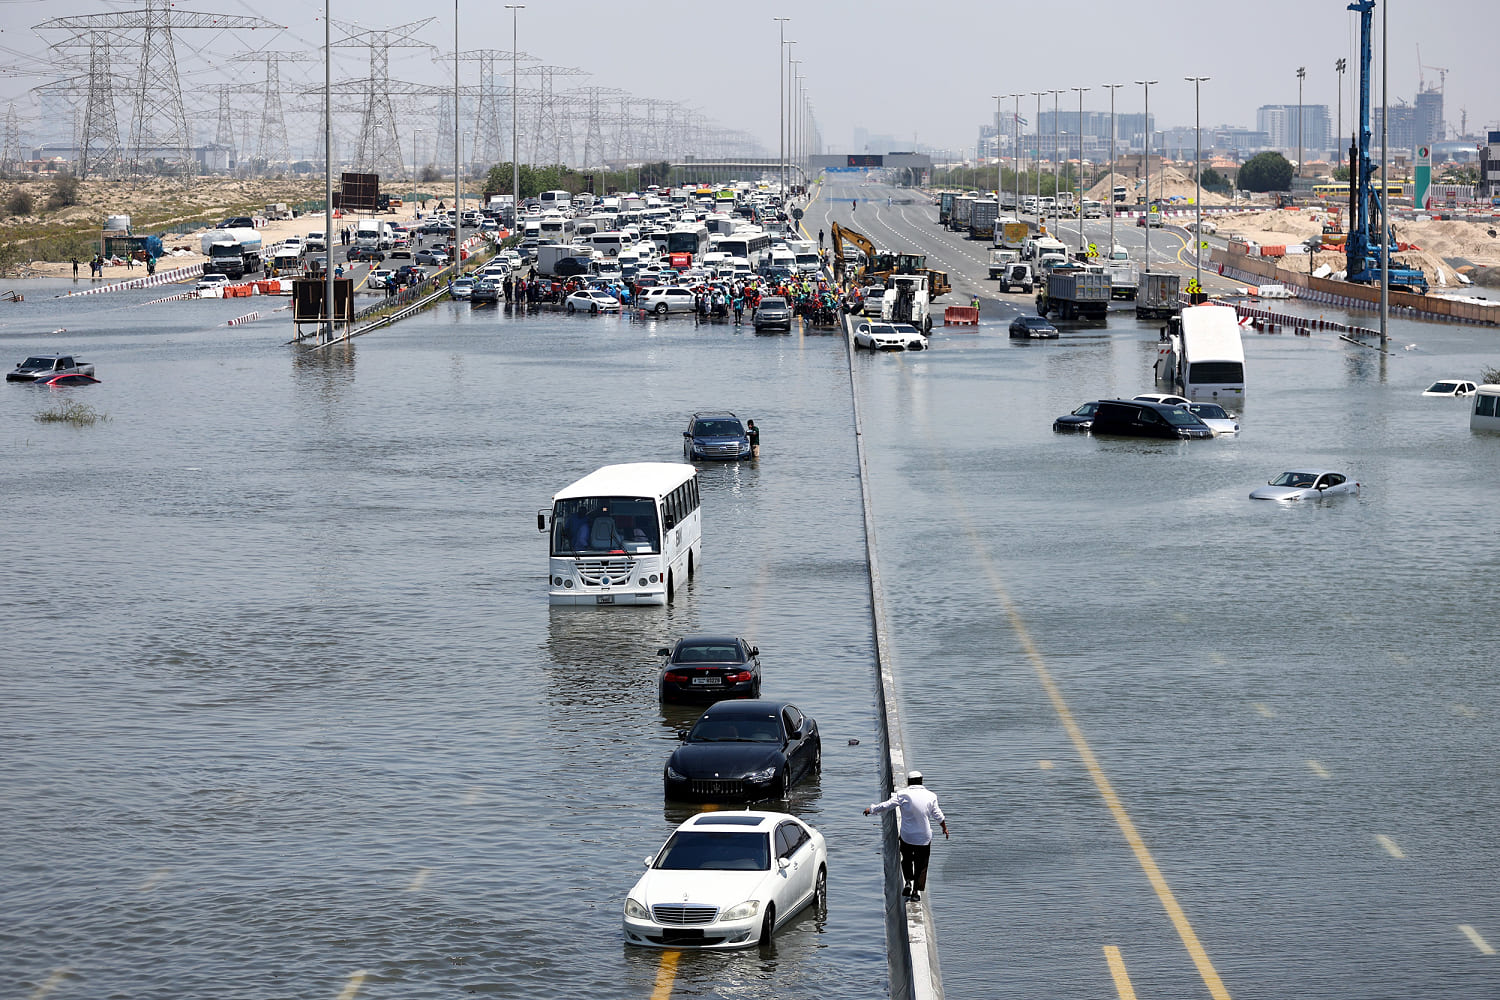 Flooded desert state UAE counts cost of epic rainstorm, airport still facing disruptions